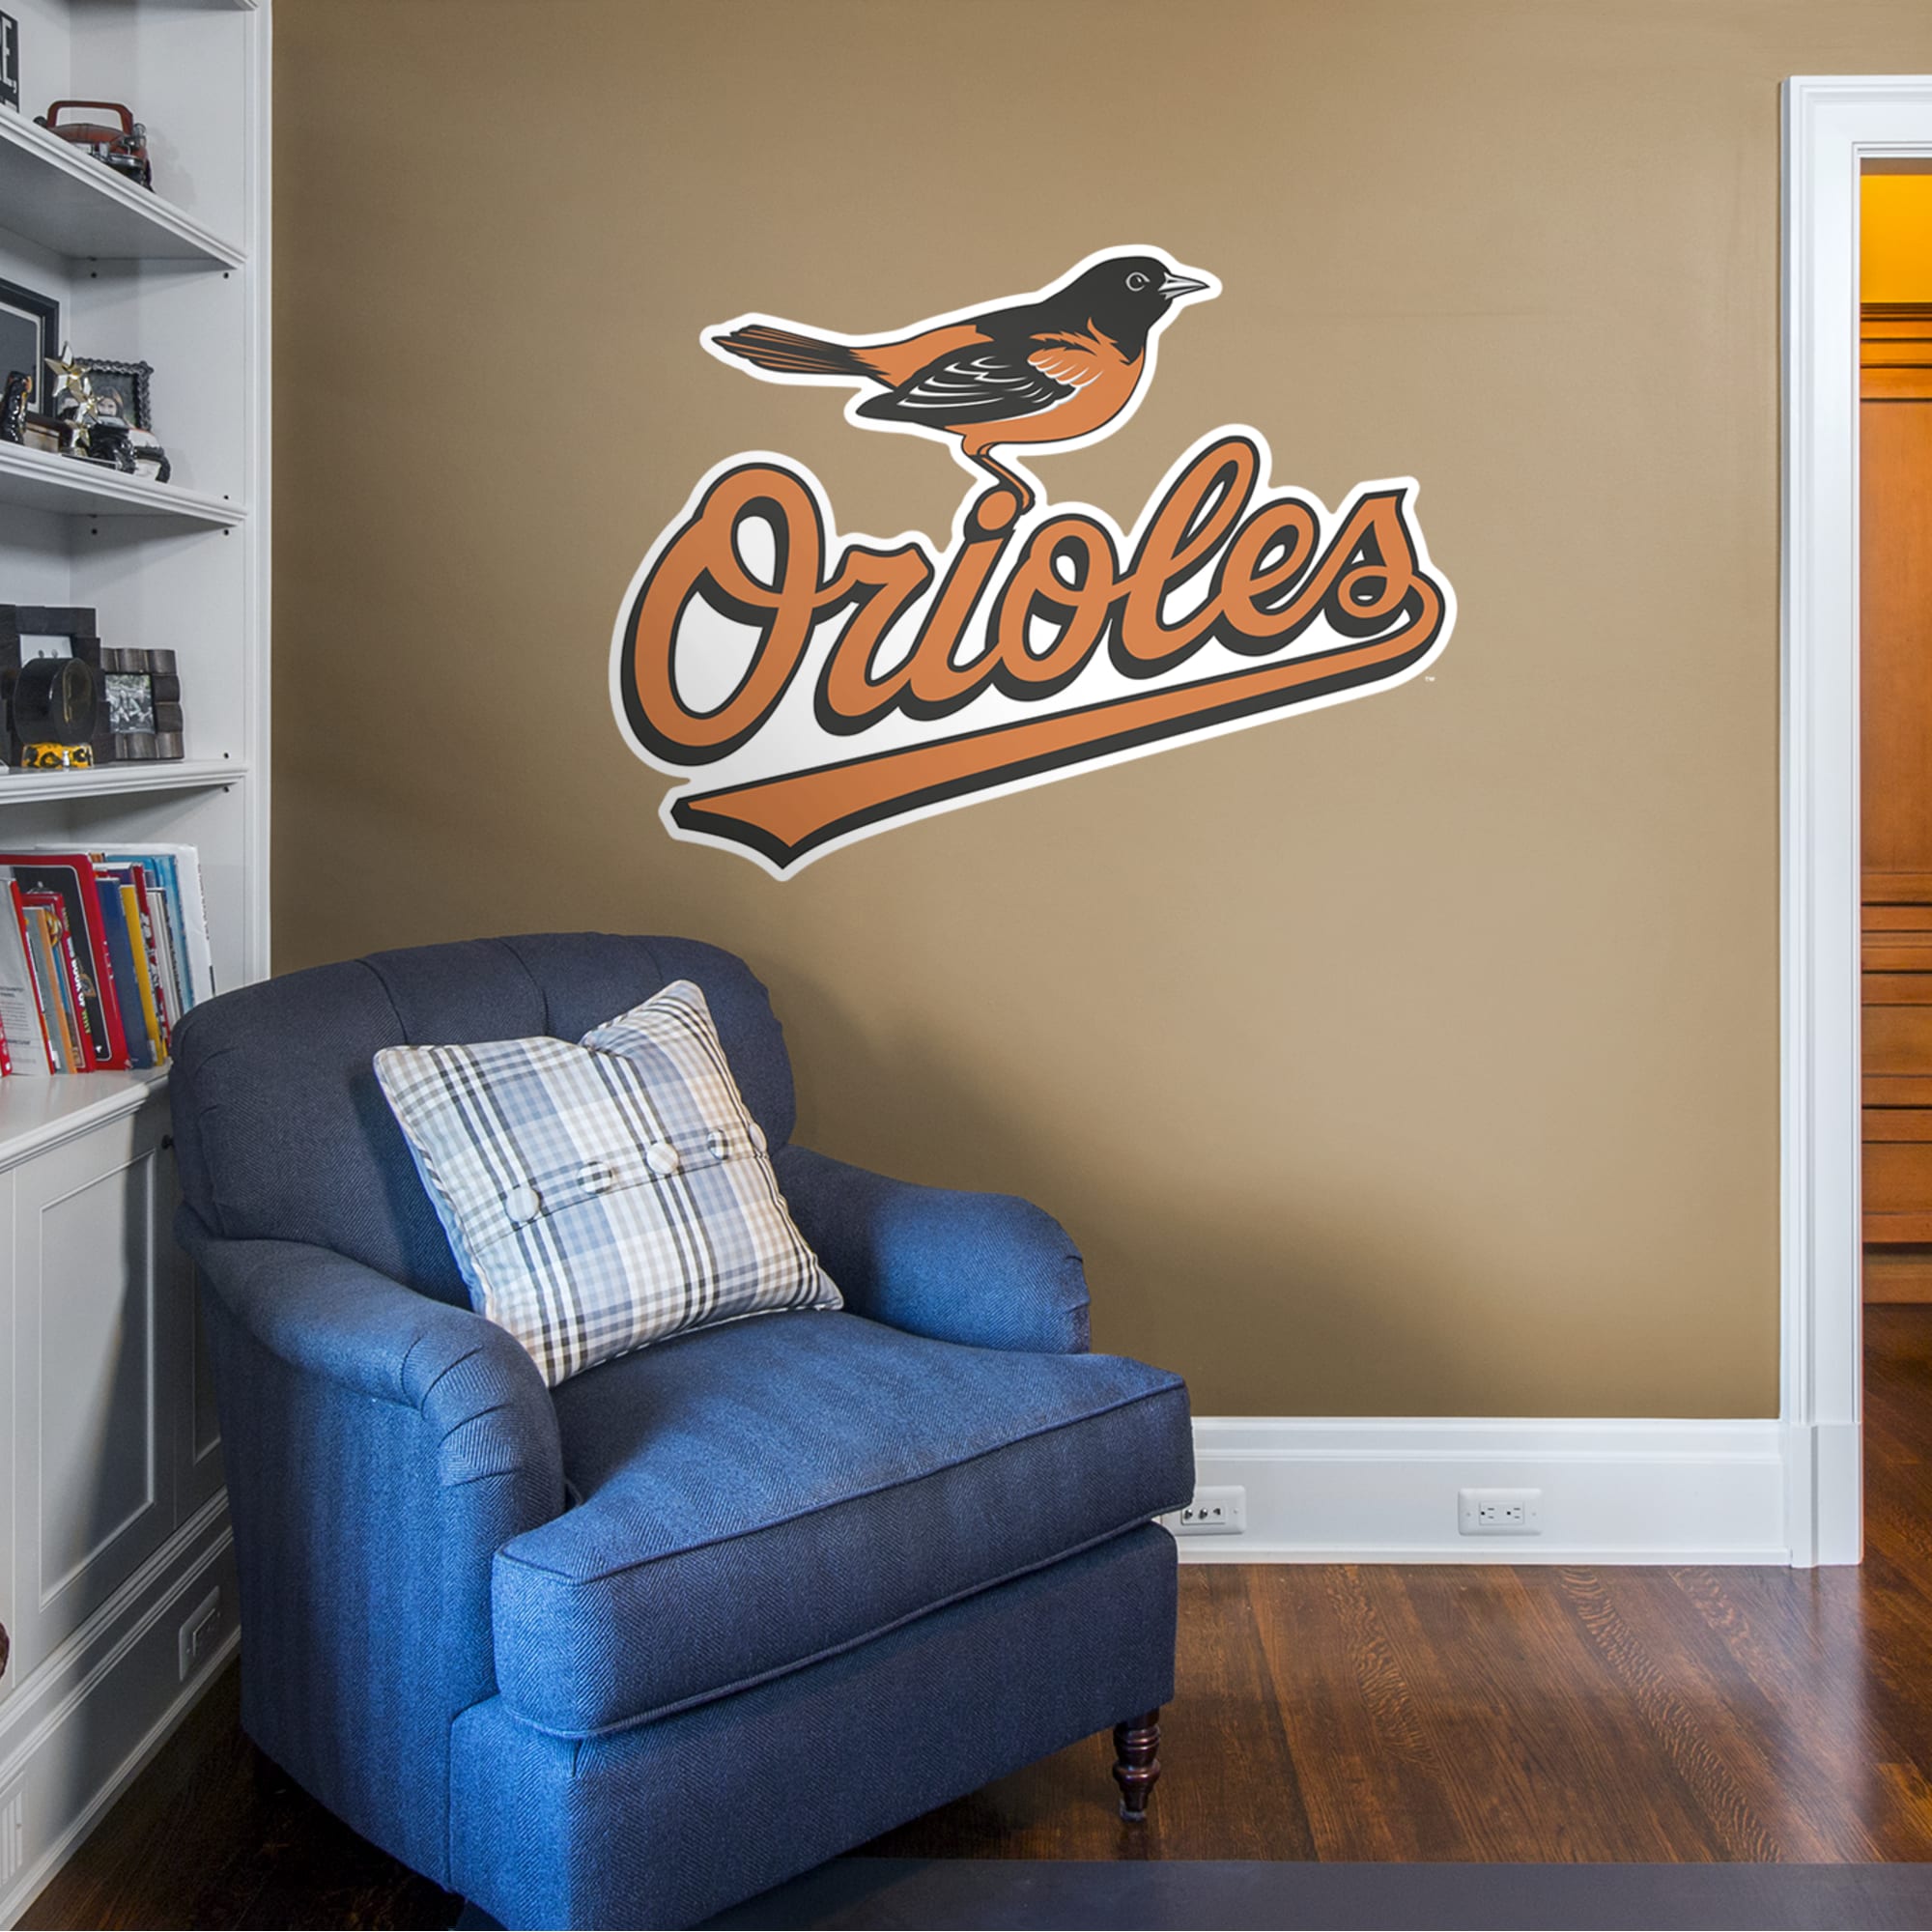 Baltimore Orioles: Logo - Officially Licensed MLB Removable Wall Decal Giant Logo (51"W x 38"H) by Fathead | Vinyl